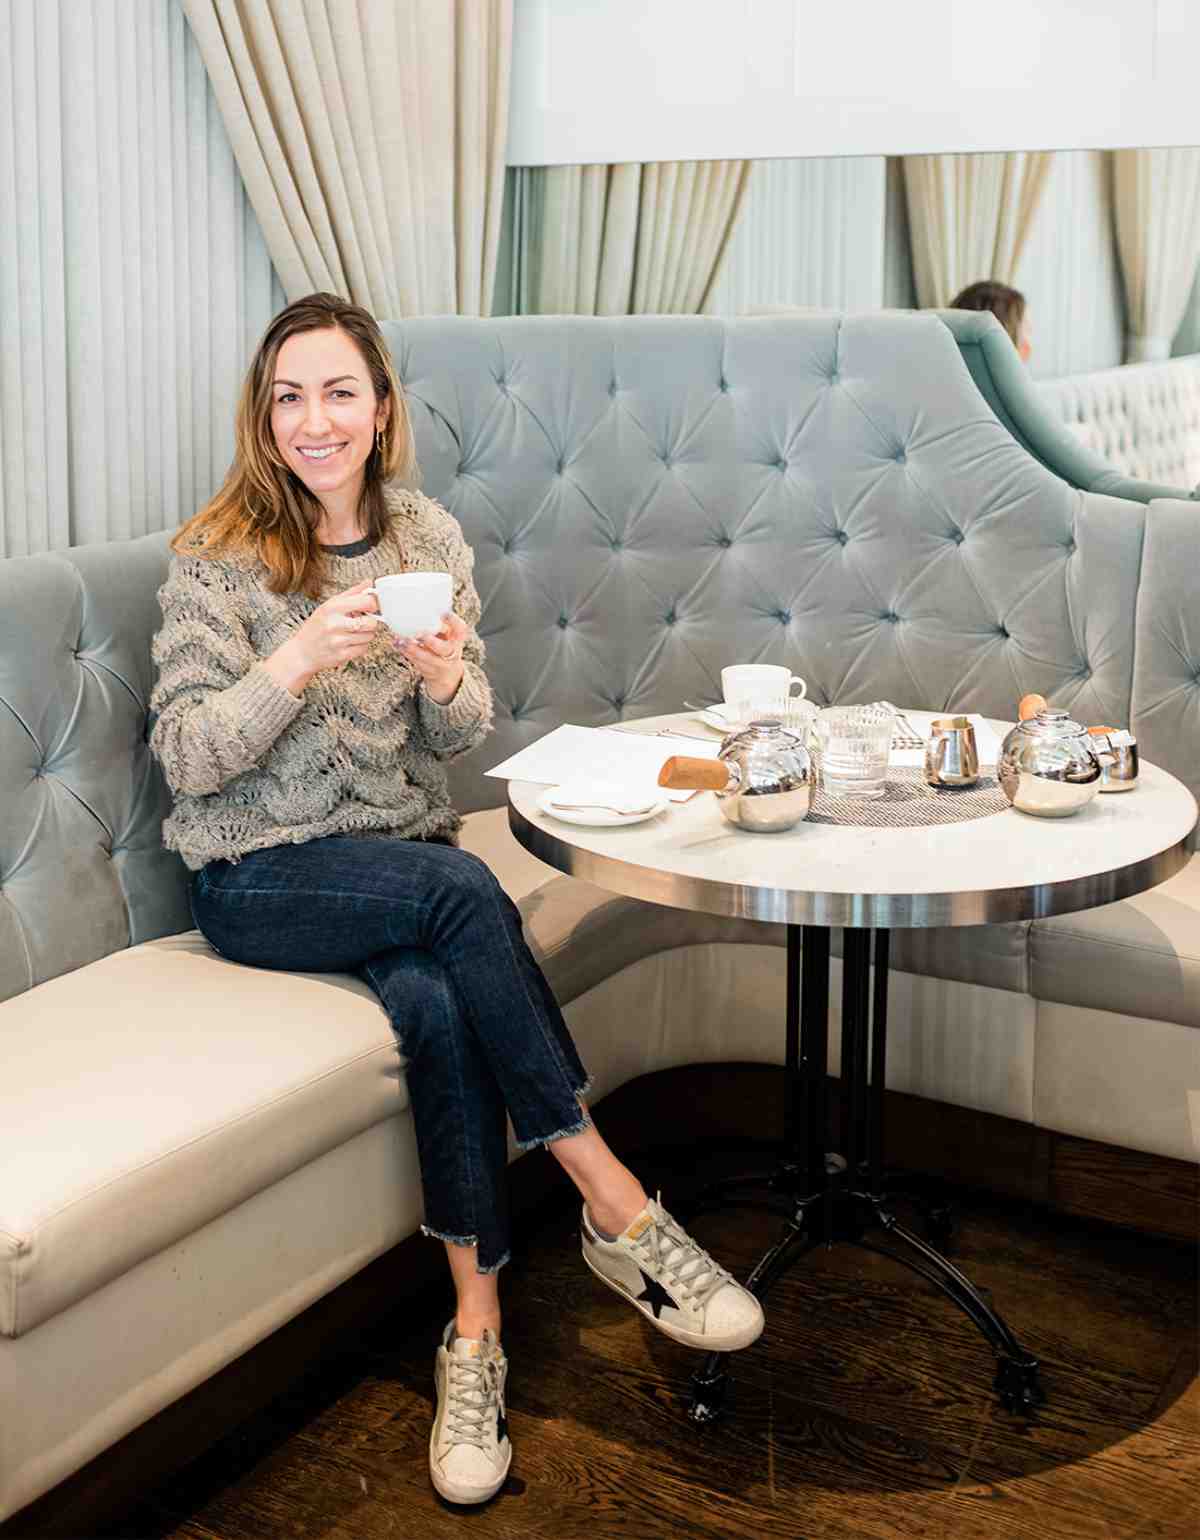 Smiling blonde woman sitting in booth of cafe holding a tea cup wearing jeans golden goose star sneakers and a sweater.